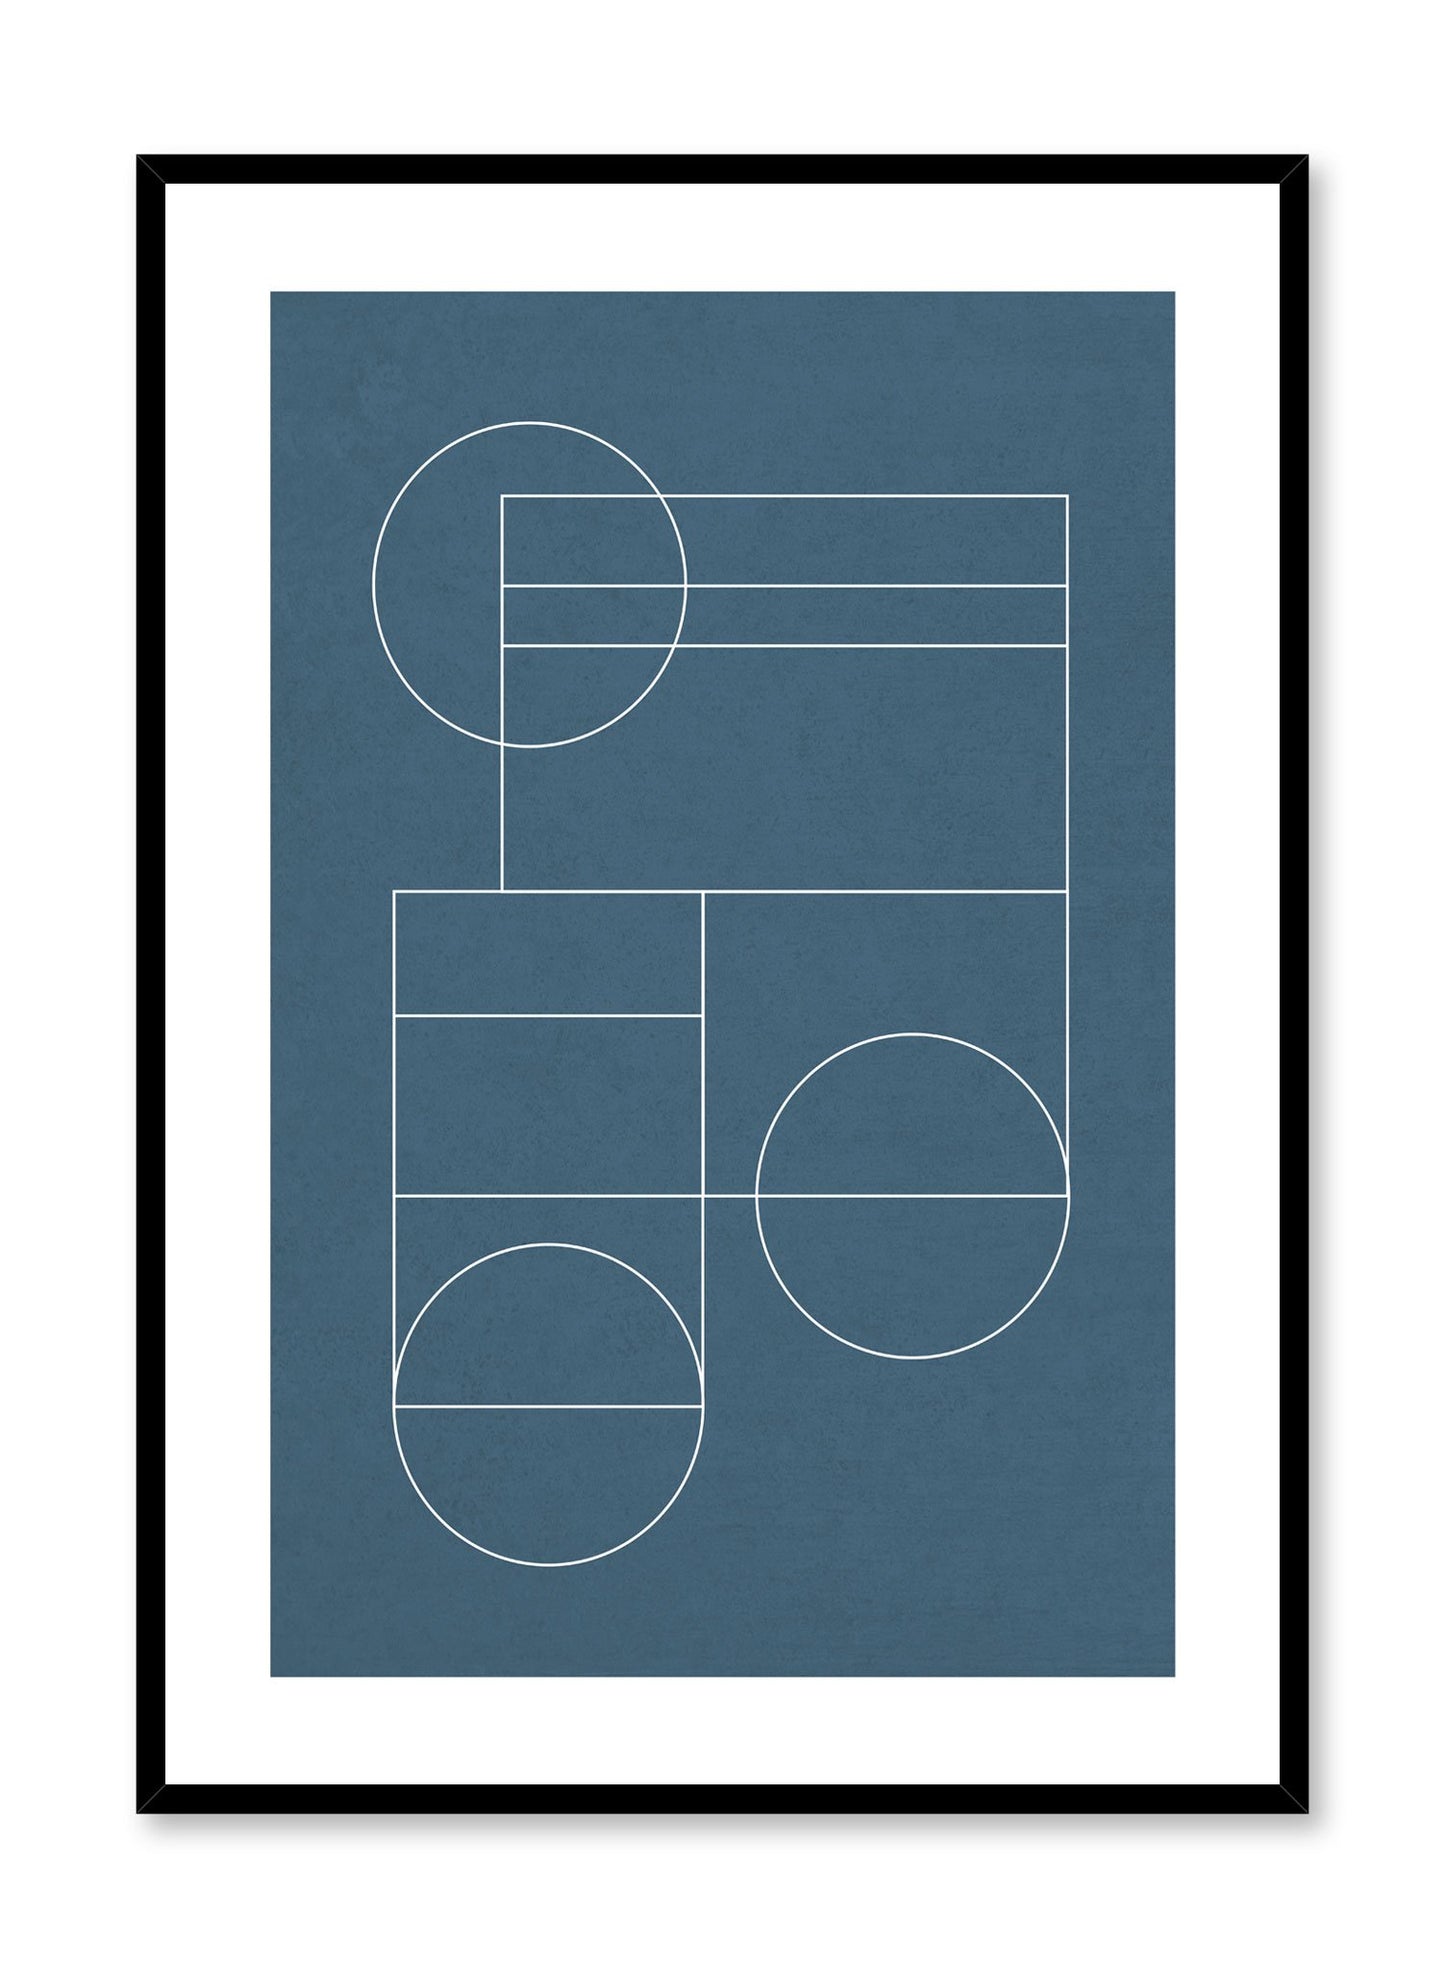 Modern minimalist poster by Opposite Wall with abstract design of Blueprint by Toffie Affichiste